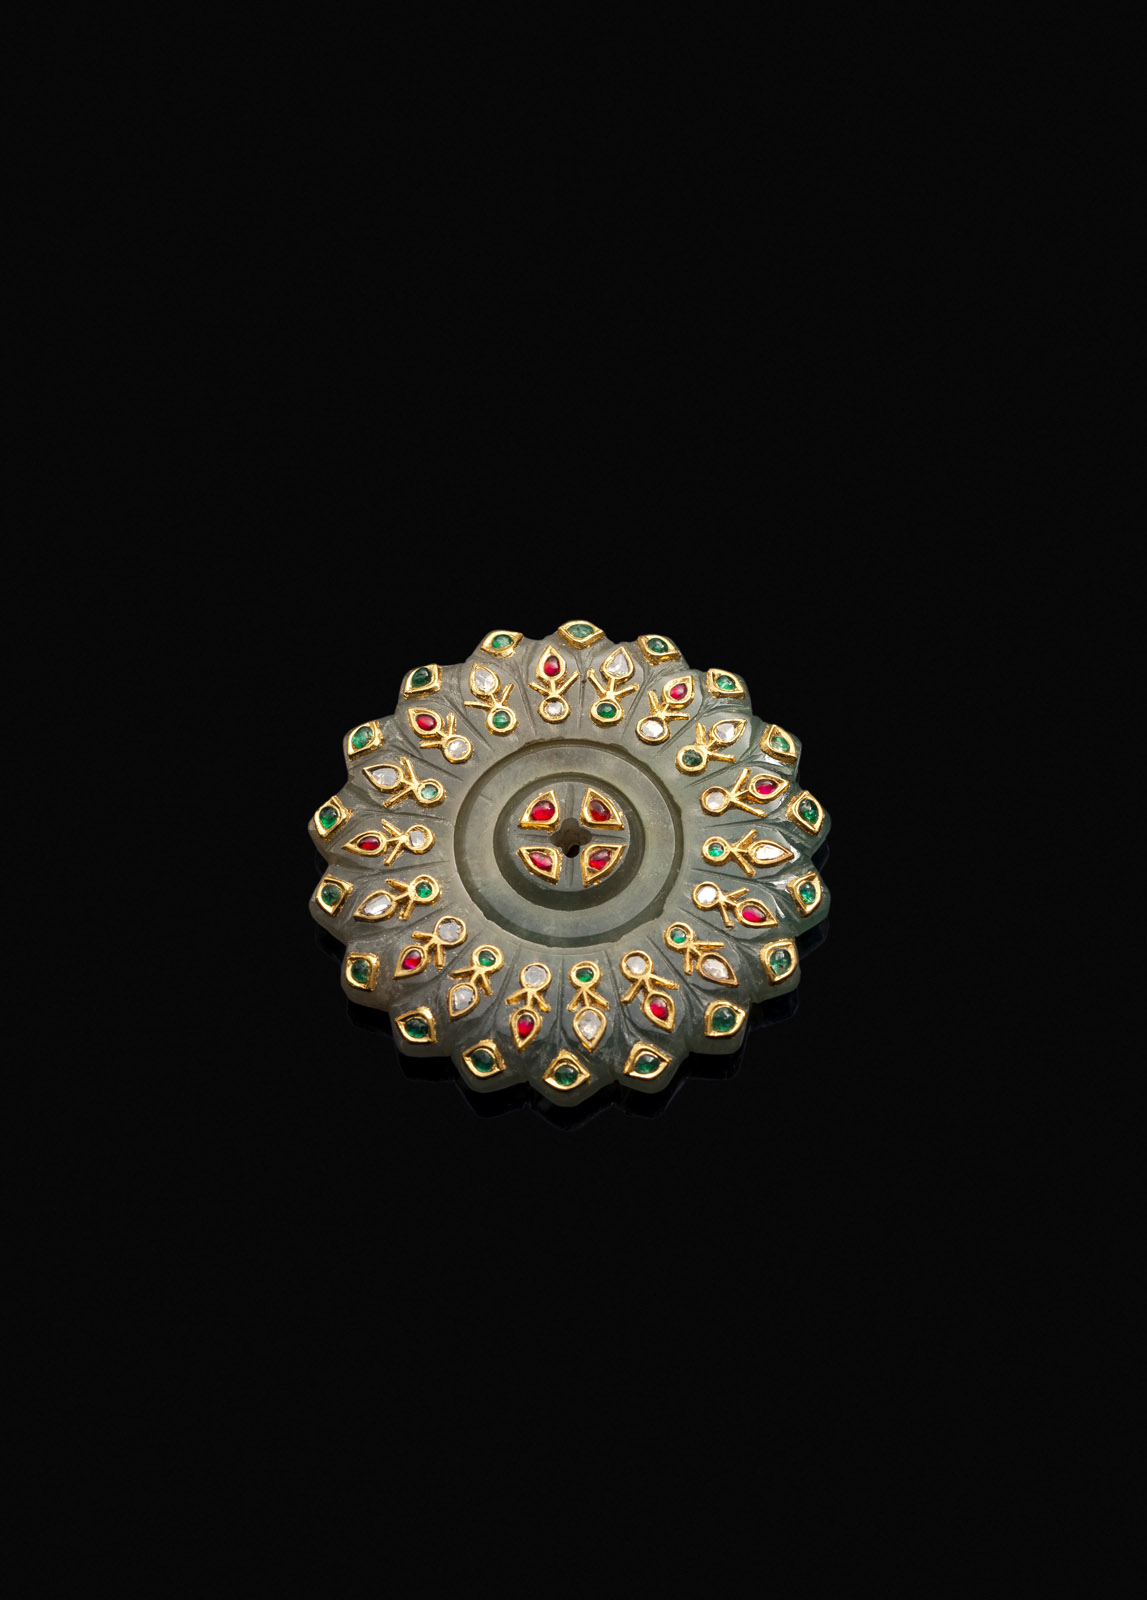 <b>A MOVABLE BLOSSOM-SHAPED MUGHAL STYLE JADE CARVING WITH INLAIYS IN GOLD, DIAMONDS AND RUBIES NEAR EMERALDS</b>